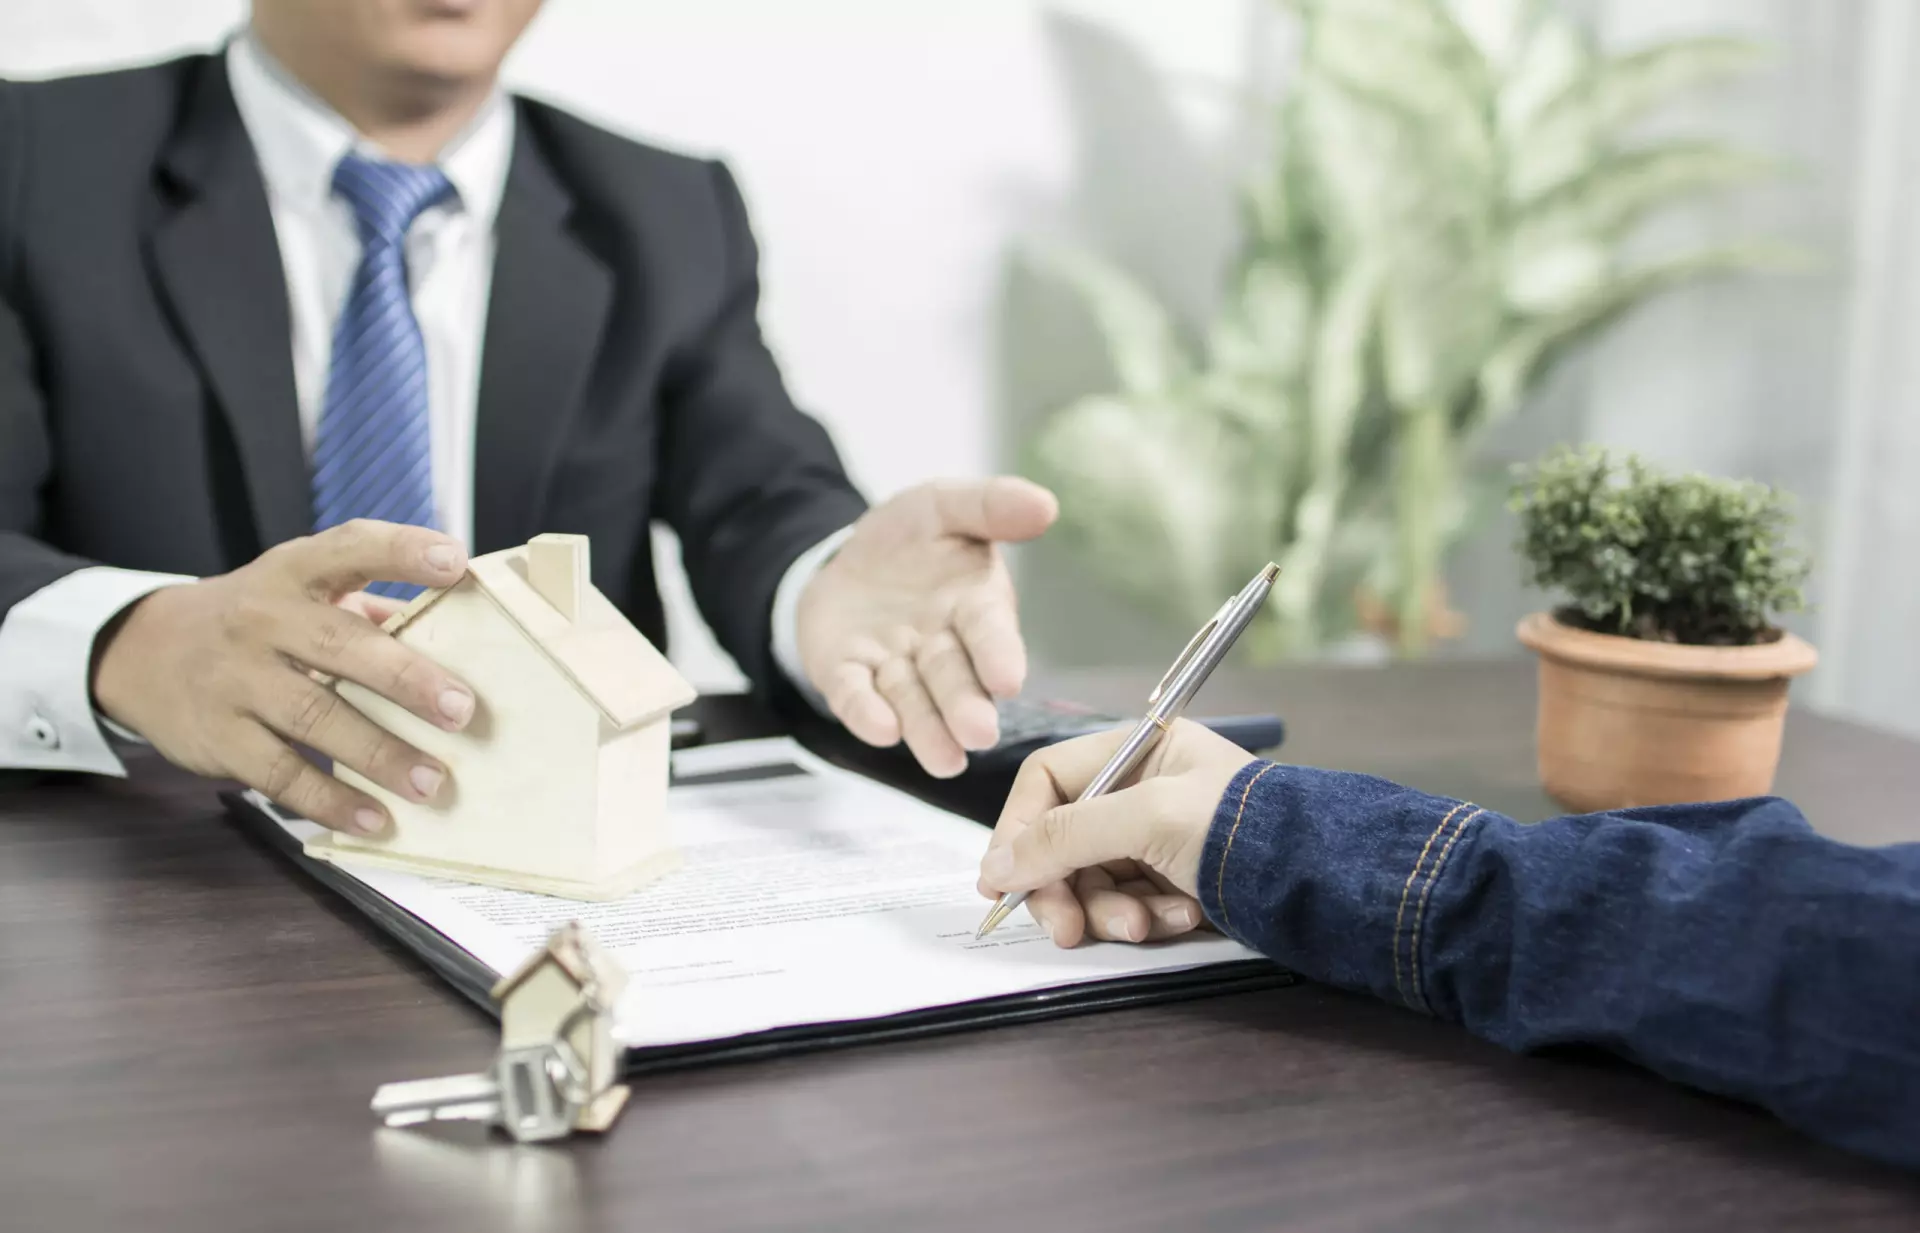 5 Questions Every Lender Should Discuss with Borrowers and Why